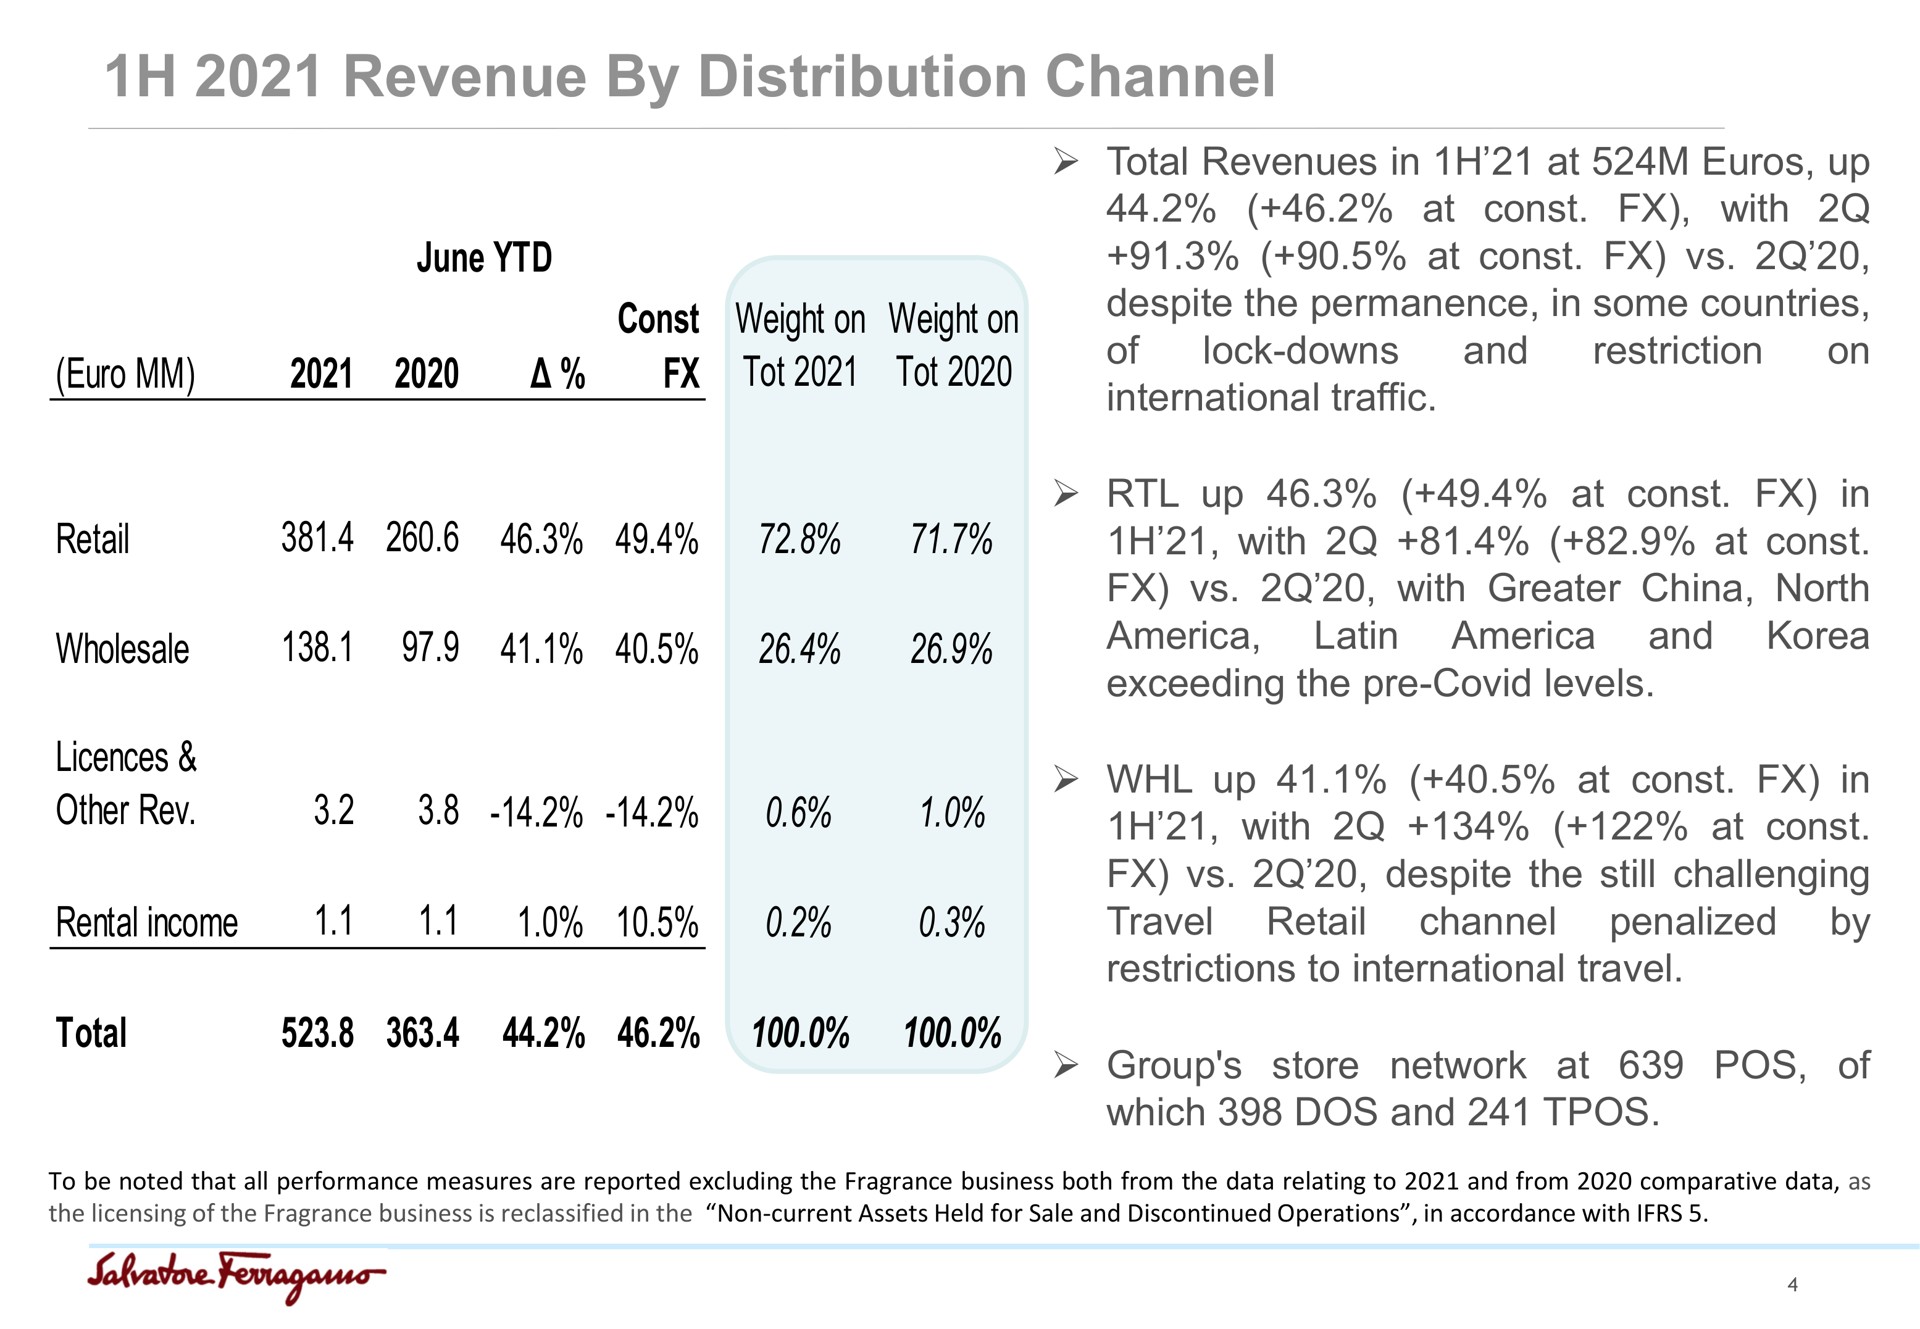 revenue by distribution channel june weight on tot weight on tot retail wholesale other rev rental income total total revenues in at up at with at despite the permanence in some countries of on and international traffic lock downs restriction up at in with at with greater china north and exceeding the covid levels up at in with at despite the still challenging by channel travel retail restrictions to international travel penalized group store network at pos of which dos and a | Salvatore Ferragamo